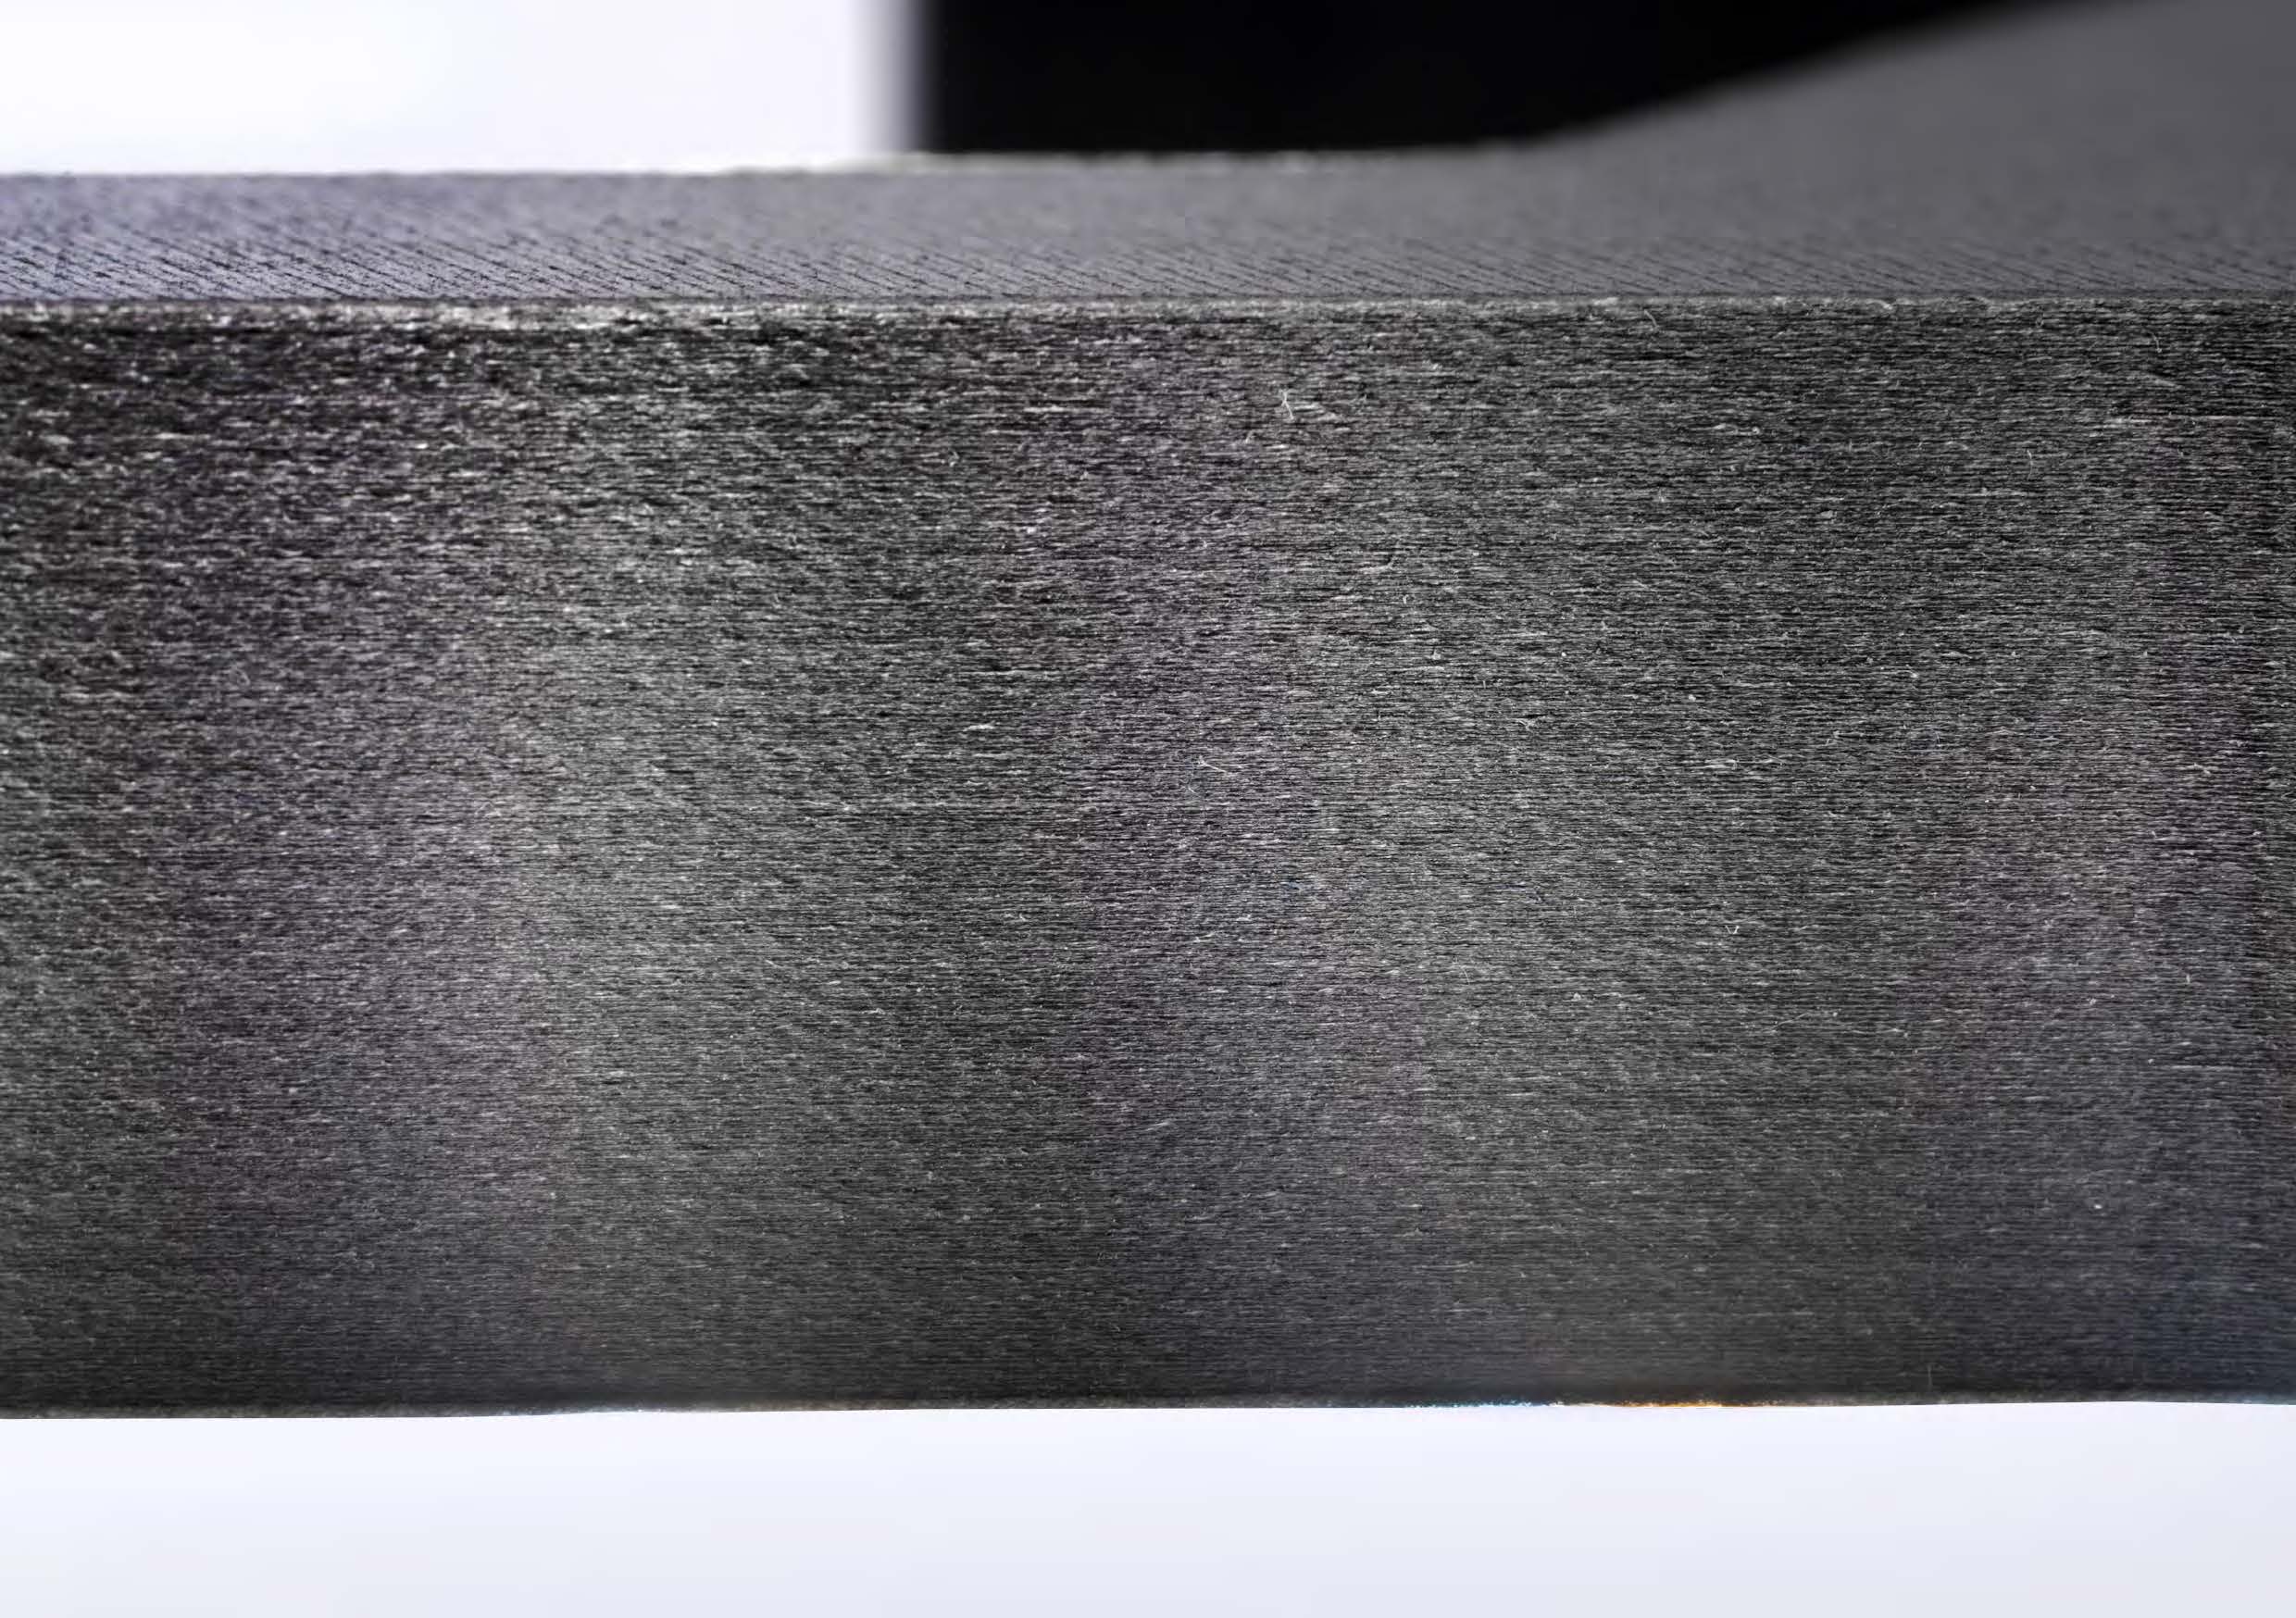 Continuous carbon fiber 3D printer open system composite material laying trajectory free control